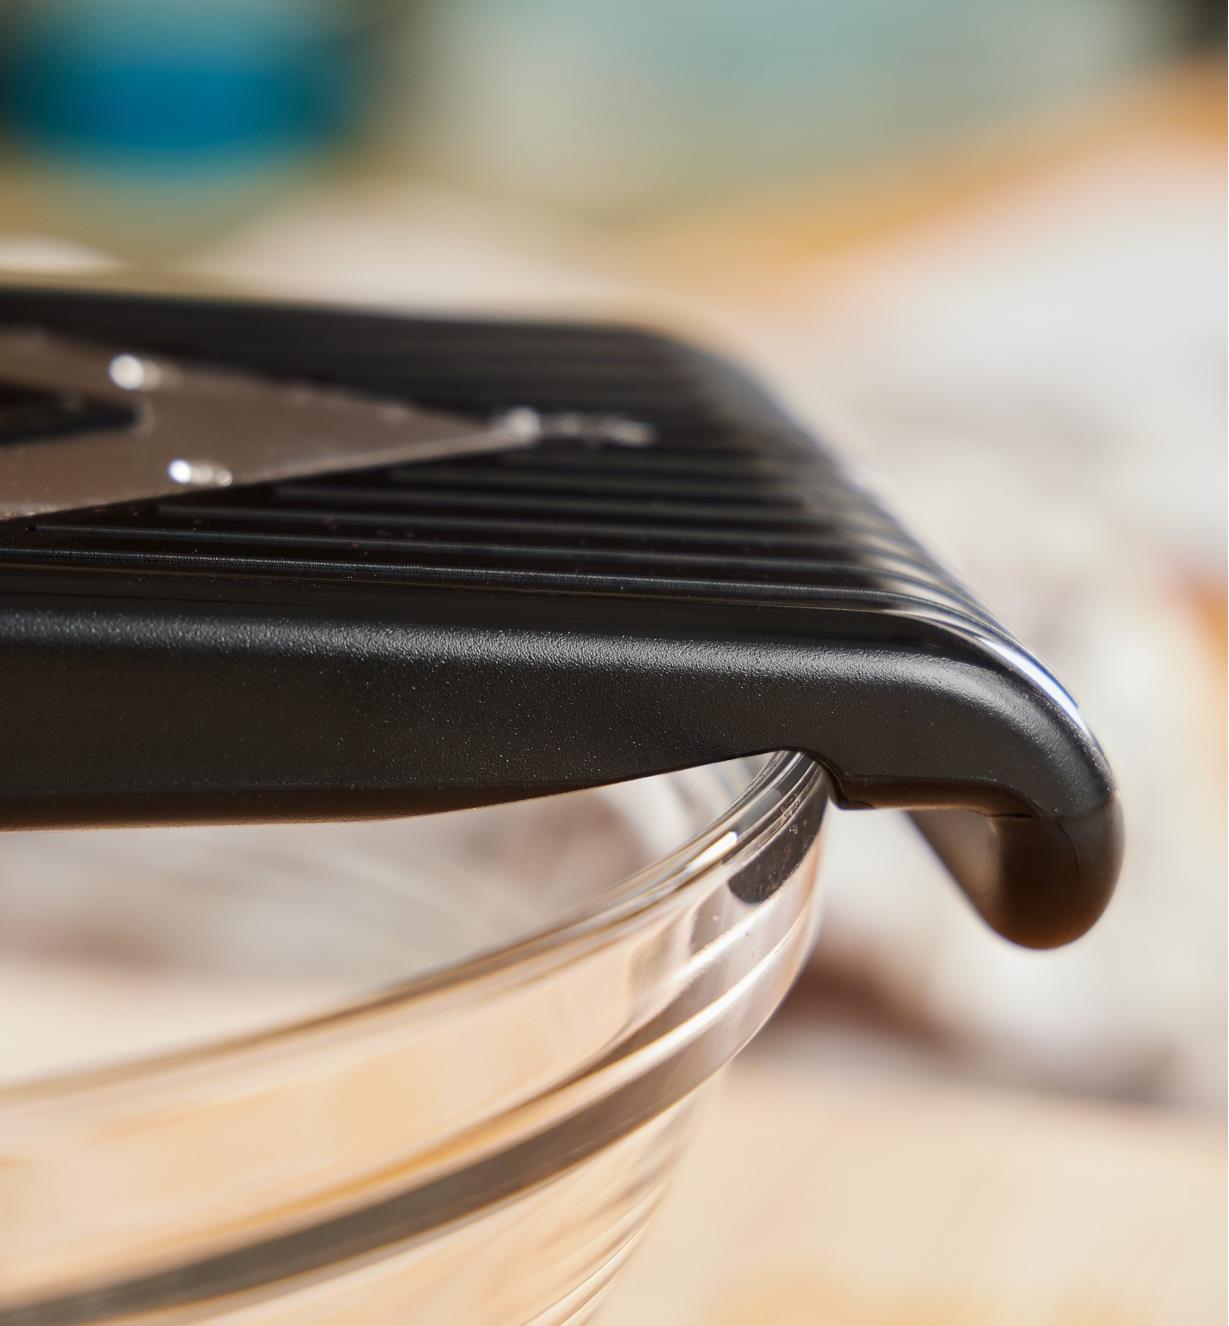 Close-up view of a bowl hook on the V-slicer